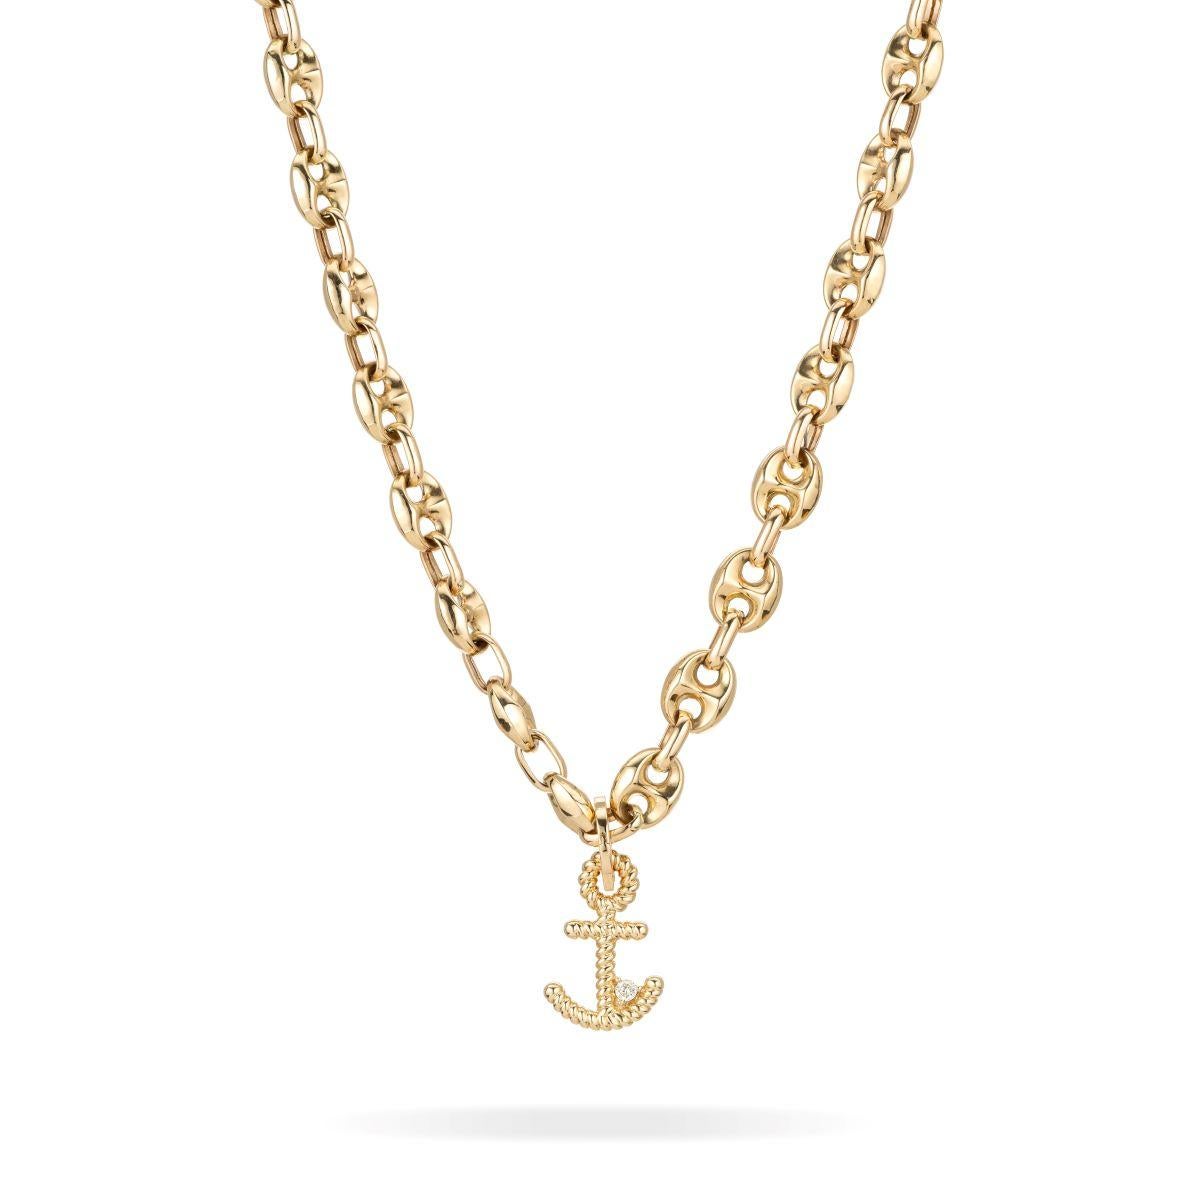 Adina Reyter One of a Kind Small Diamond Anchor Mariner Necklace - Y14

14K yellow gold larger mariner chain link necklace with a small diamond anchor charm.

Measurement:  anchor is 21 mm x 14 mm, mariner chain is 16